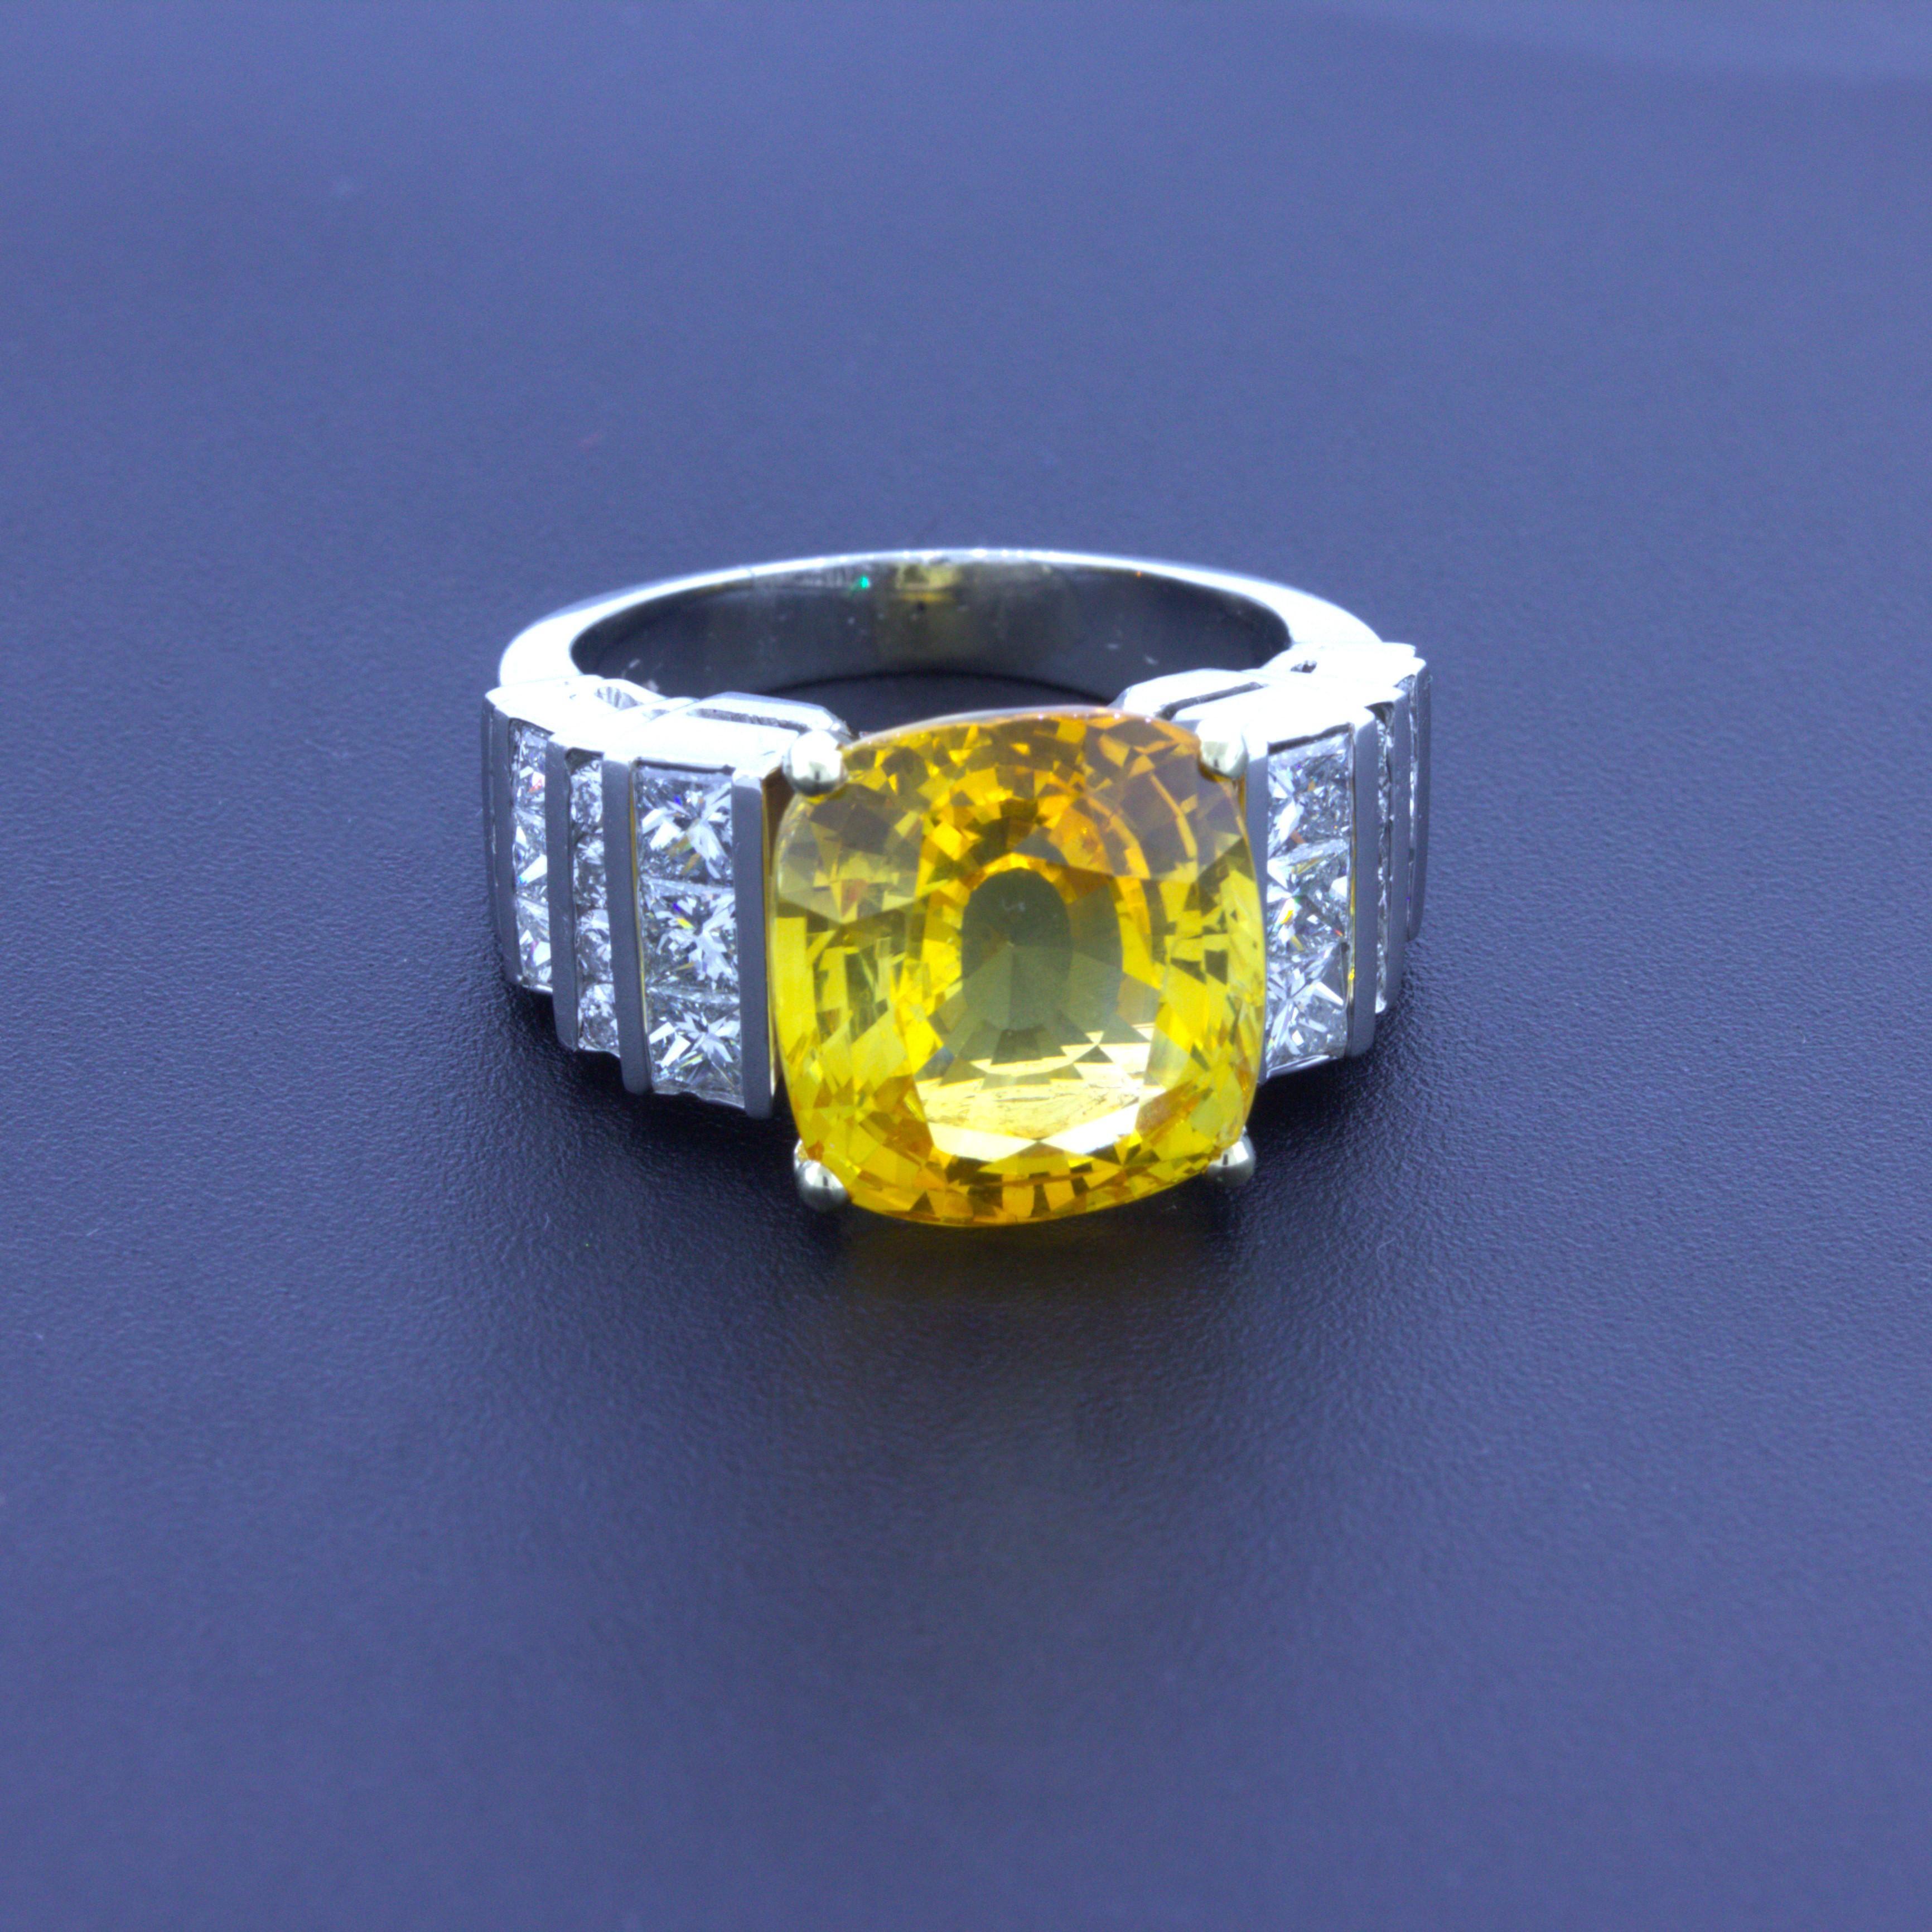 A chic and elegant diamond gemstone ring featuring a fine and natural yellow sapphire weighing 9.41 carats. The cushion-shape gem has a bright and brilliant orangy-yellow color that scintillates in the light. It is complemented by approximately 2